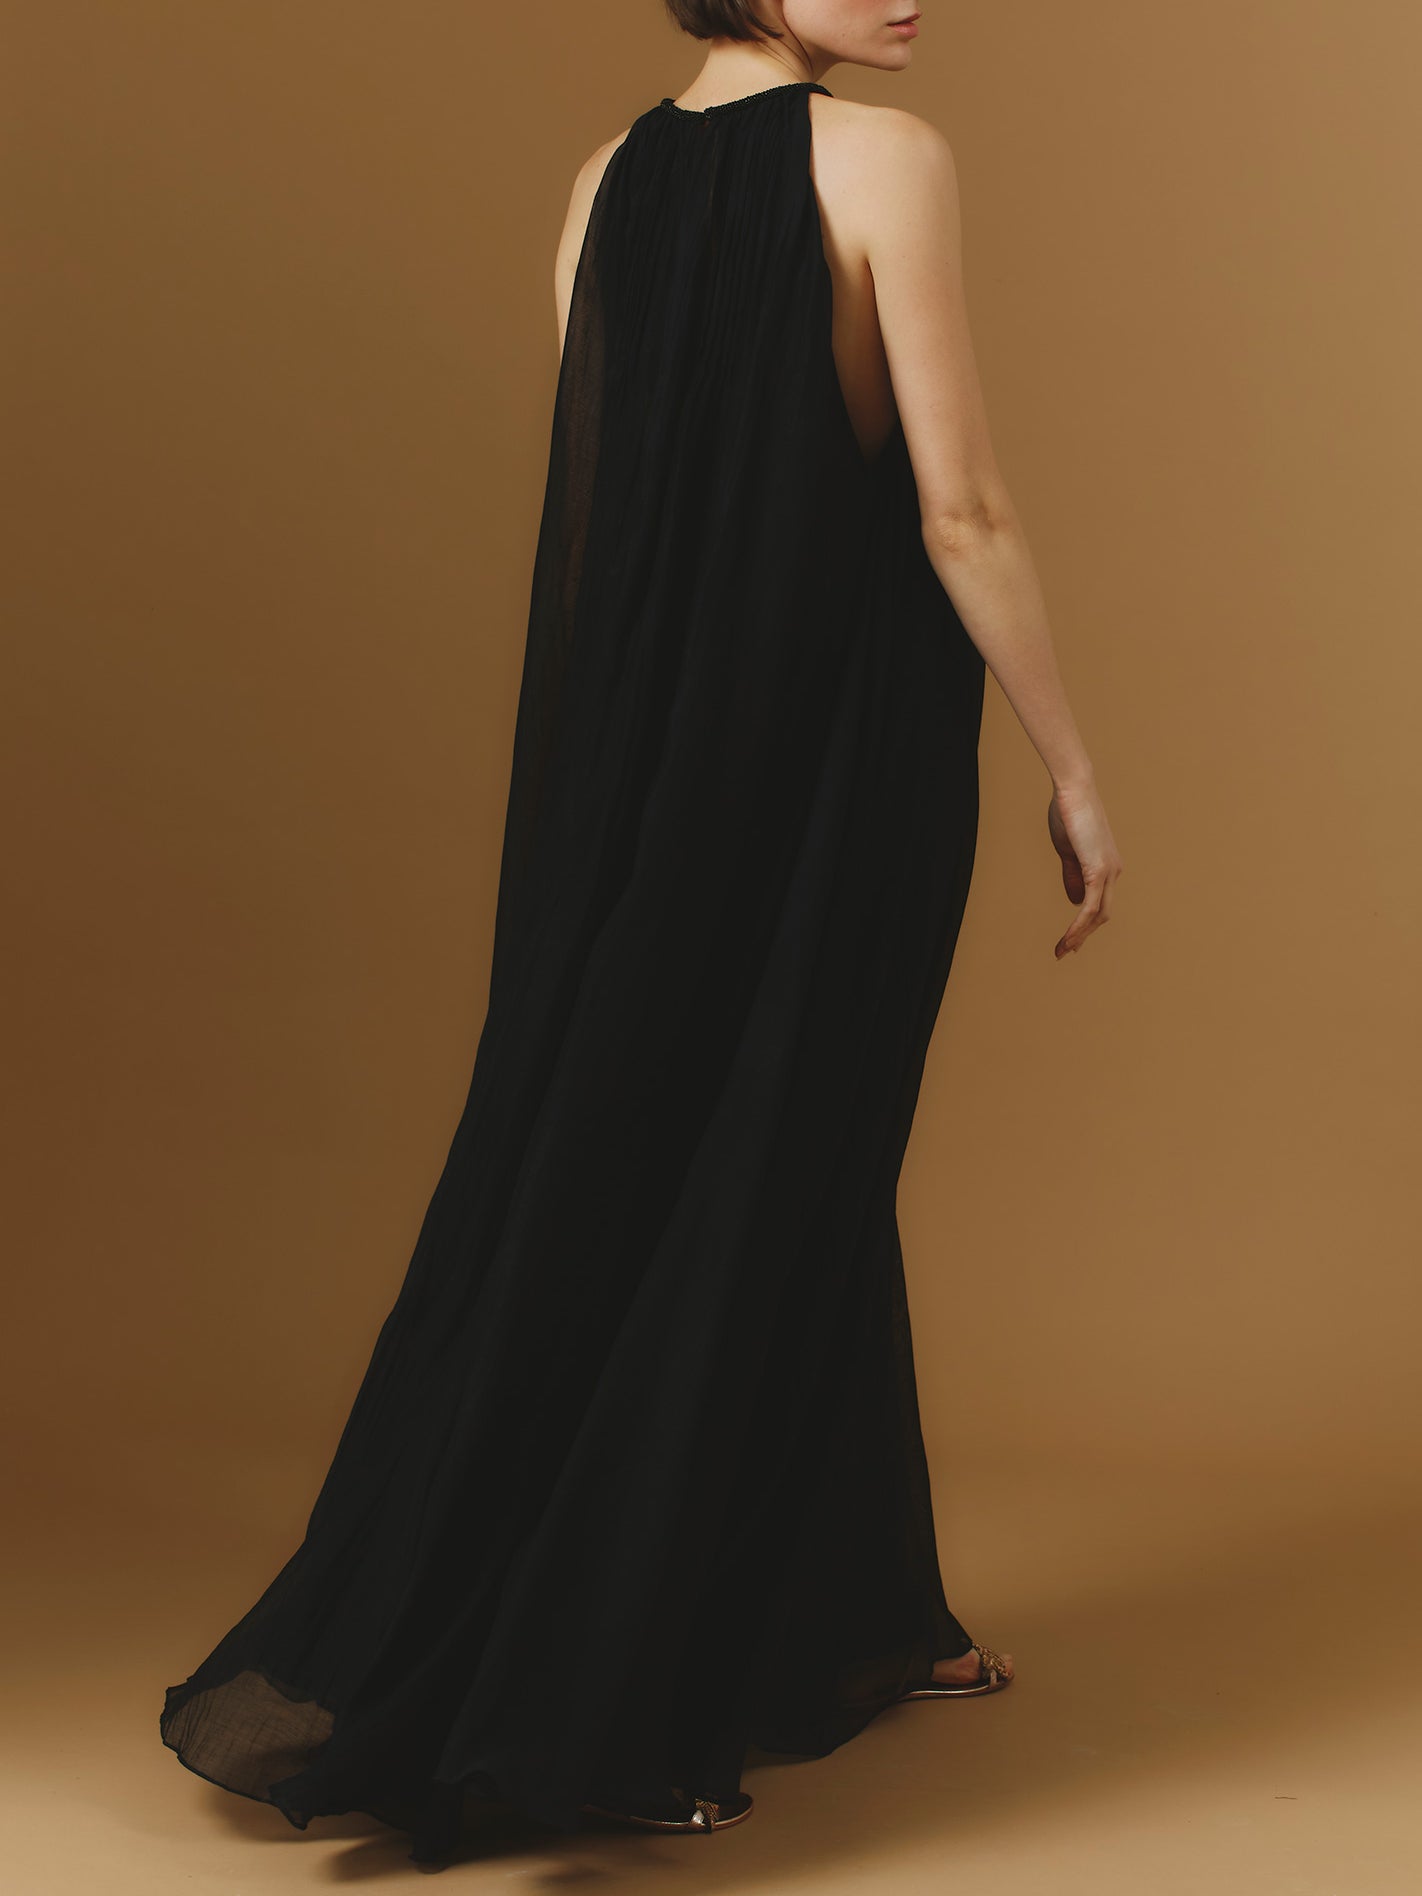 Back view of Zenith Chanderi Appliqué Black Long Dress by Thierry Colson